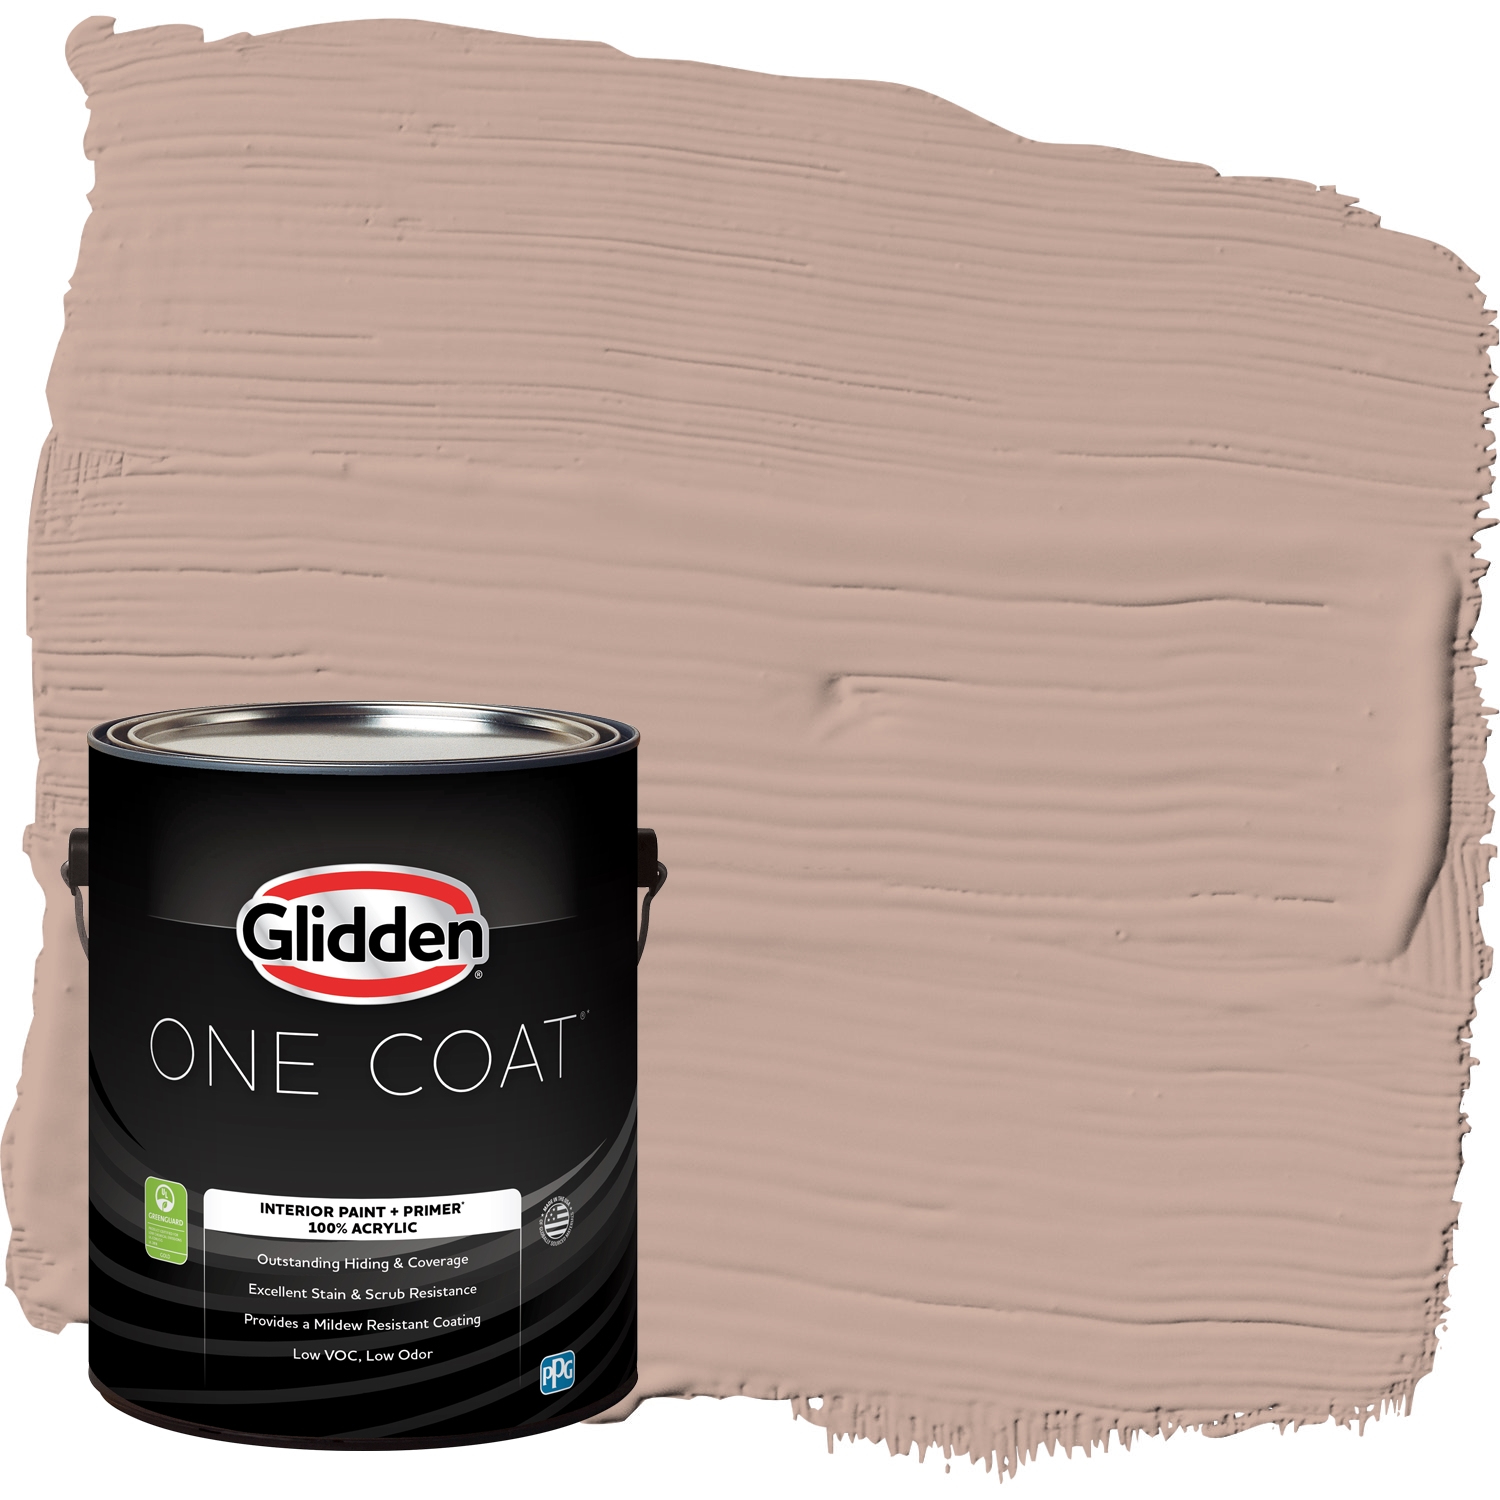 Glidden One Coat Interior Paint and Primer, Taupe Tapestry / Orange, Gallon, Eggshell - image 1 of 11